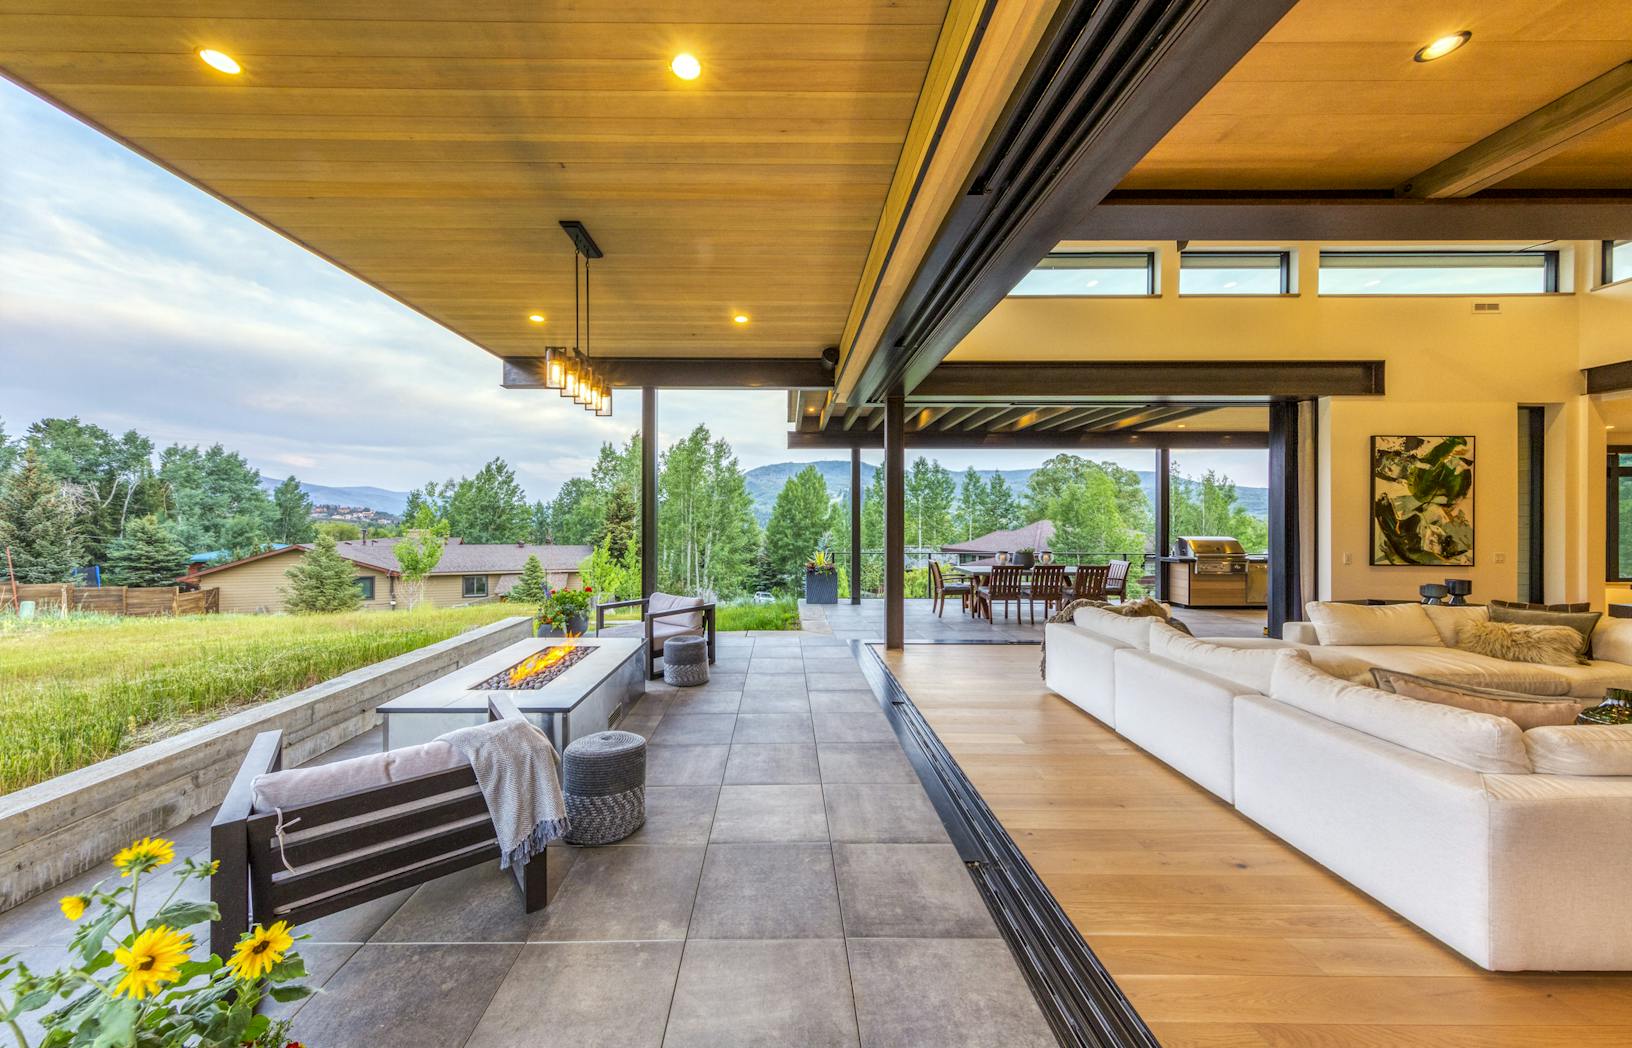 A modern home with a large deck and outdoor furniture